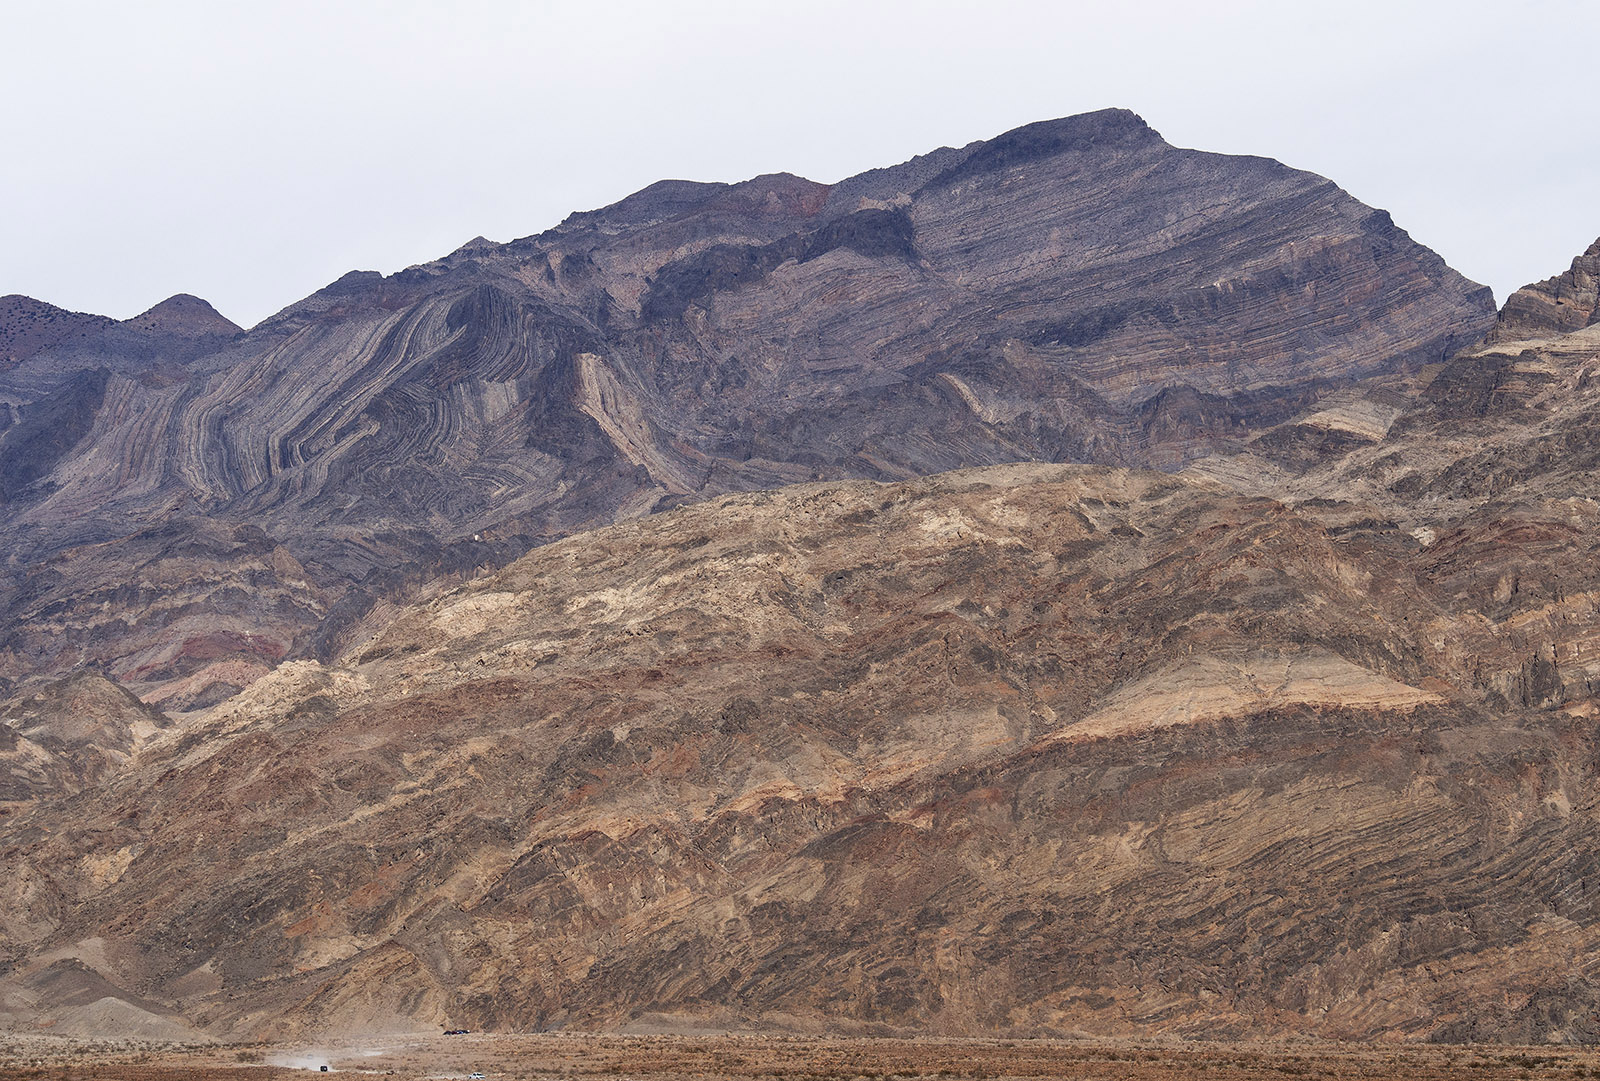 Grapevine Mountains at the exit of Titus Canyon.  There are marked distortions and folding of Paleozoic strata.  In the lower right, the Bonanza King Formation is overturned.